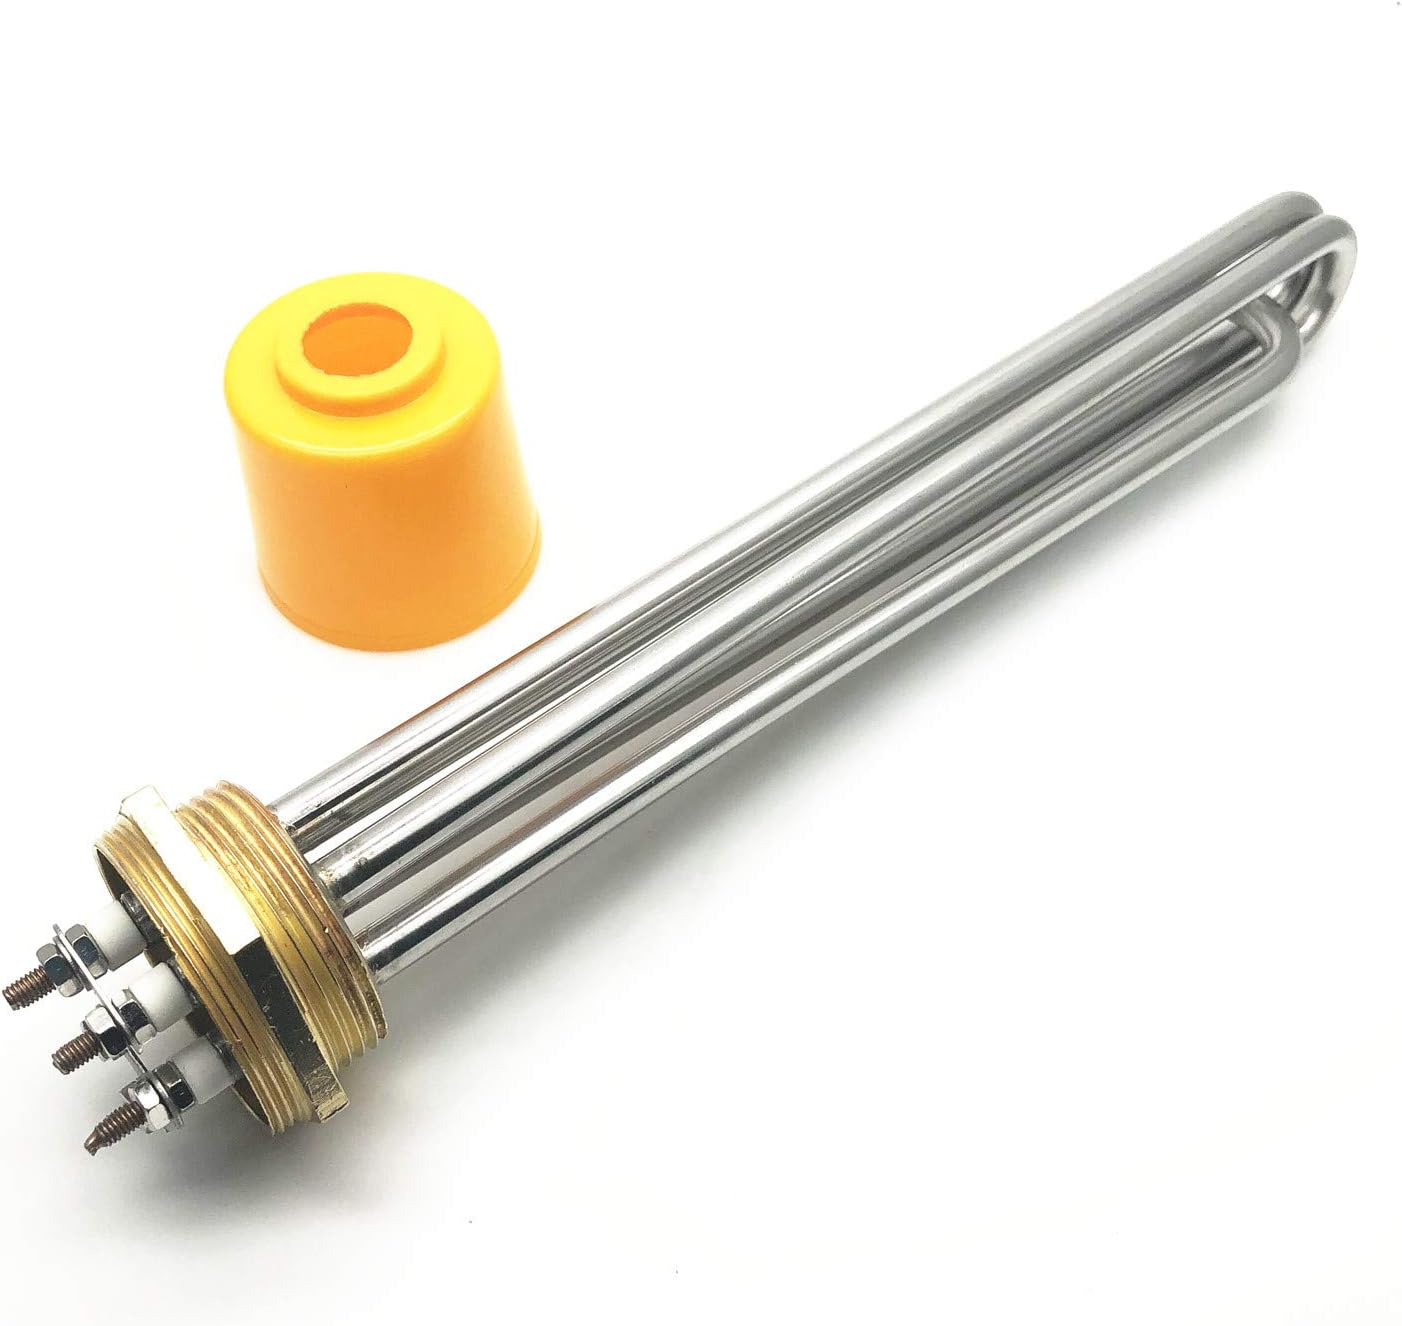 Ldexin 1 1 2 Thread Electric Water Heater Tube Stainless Steel